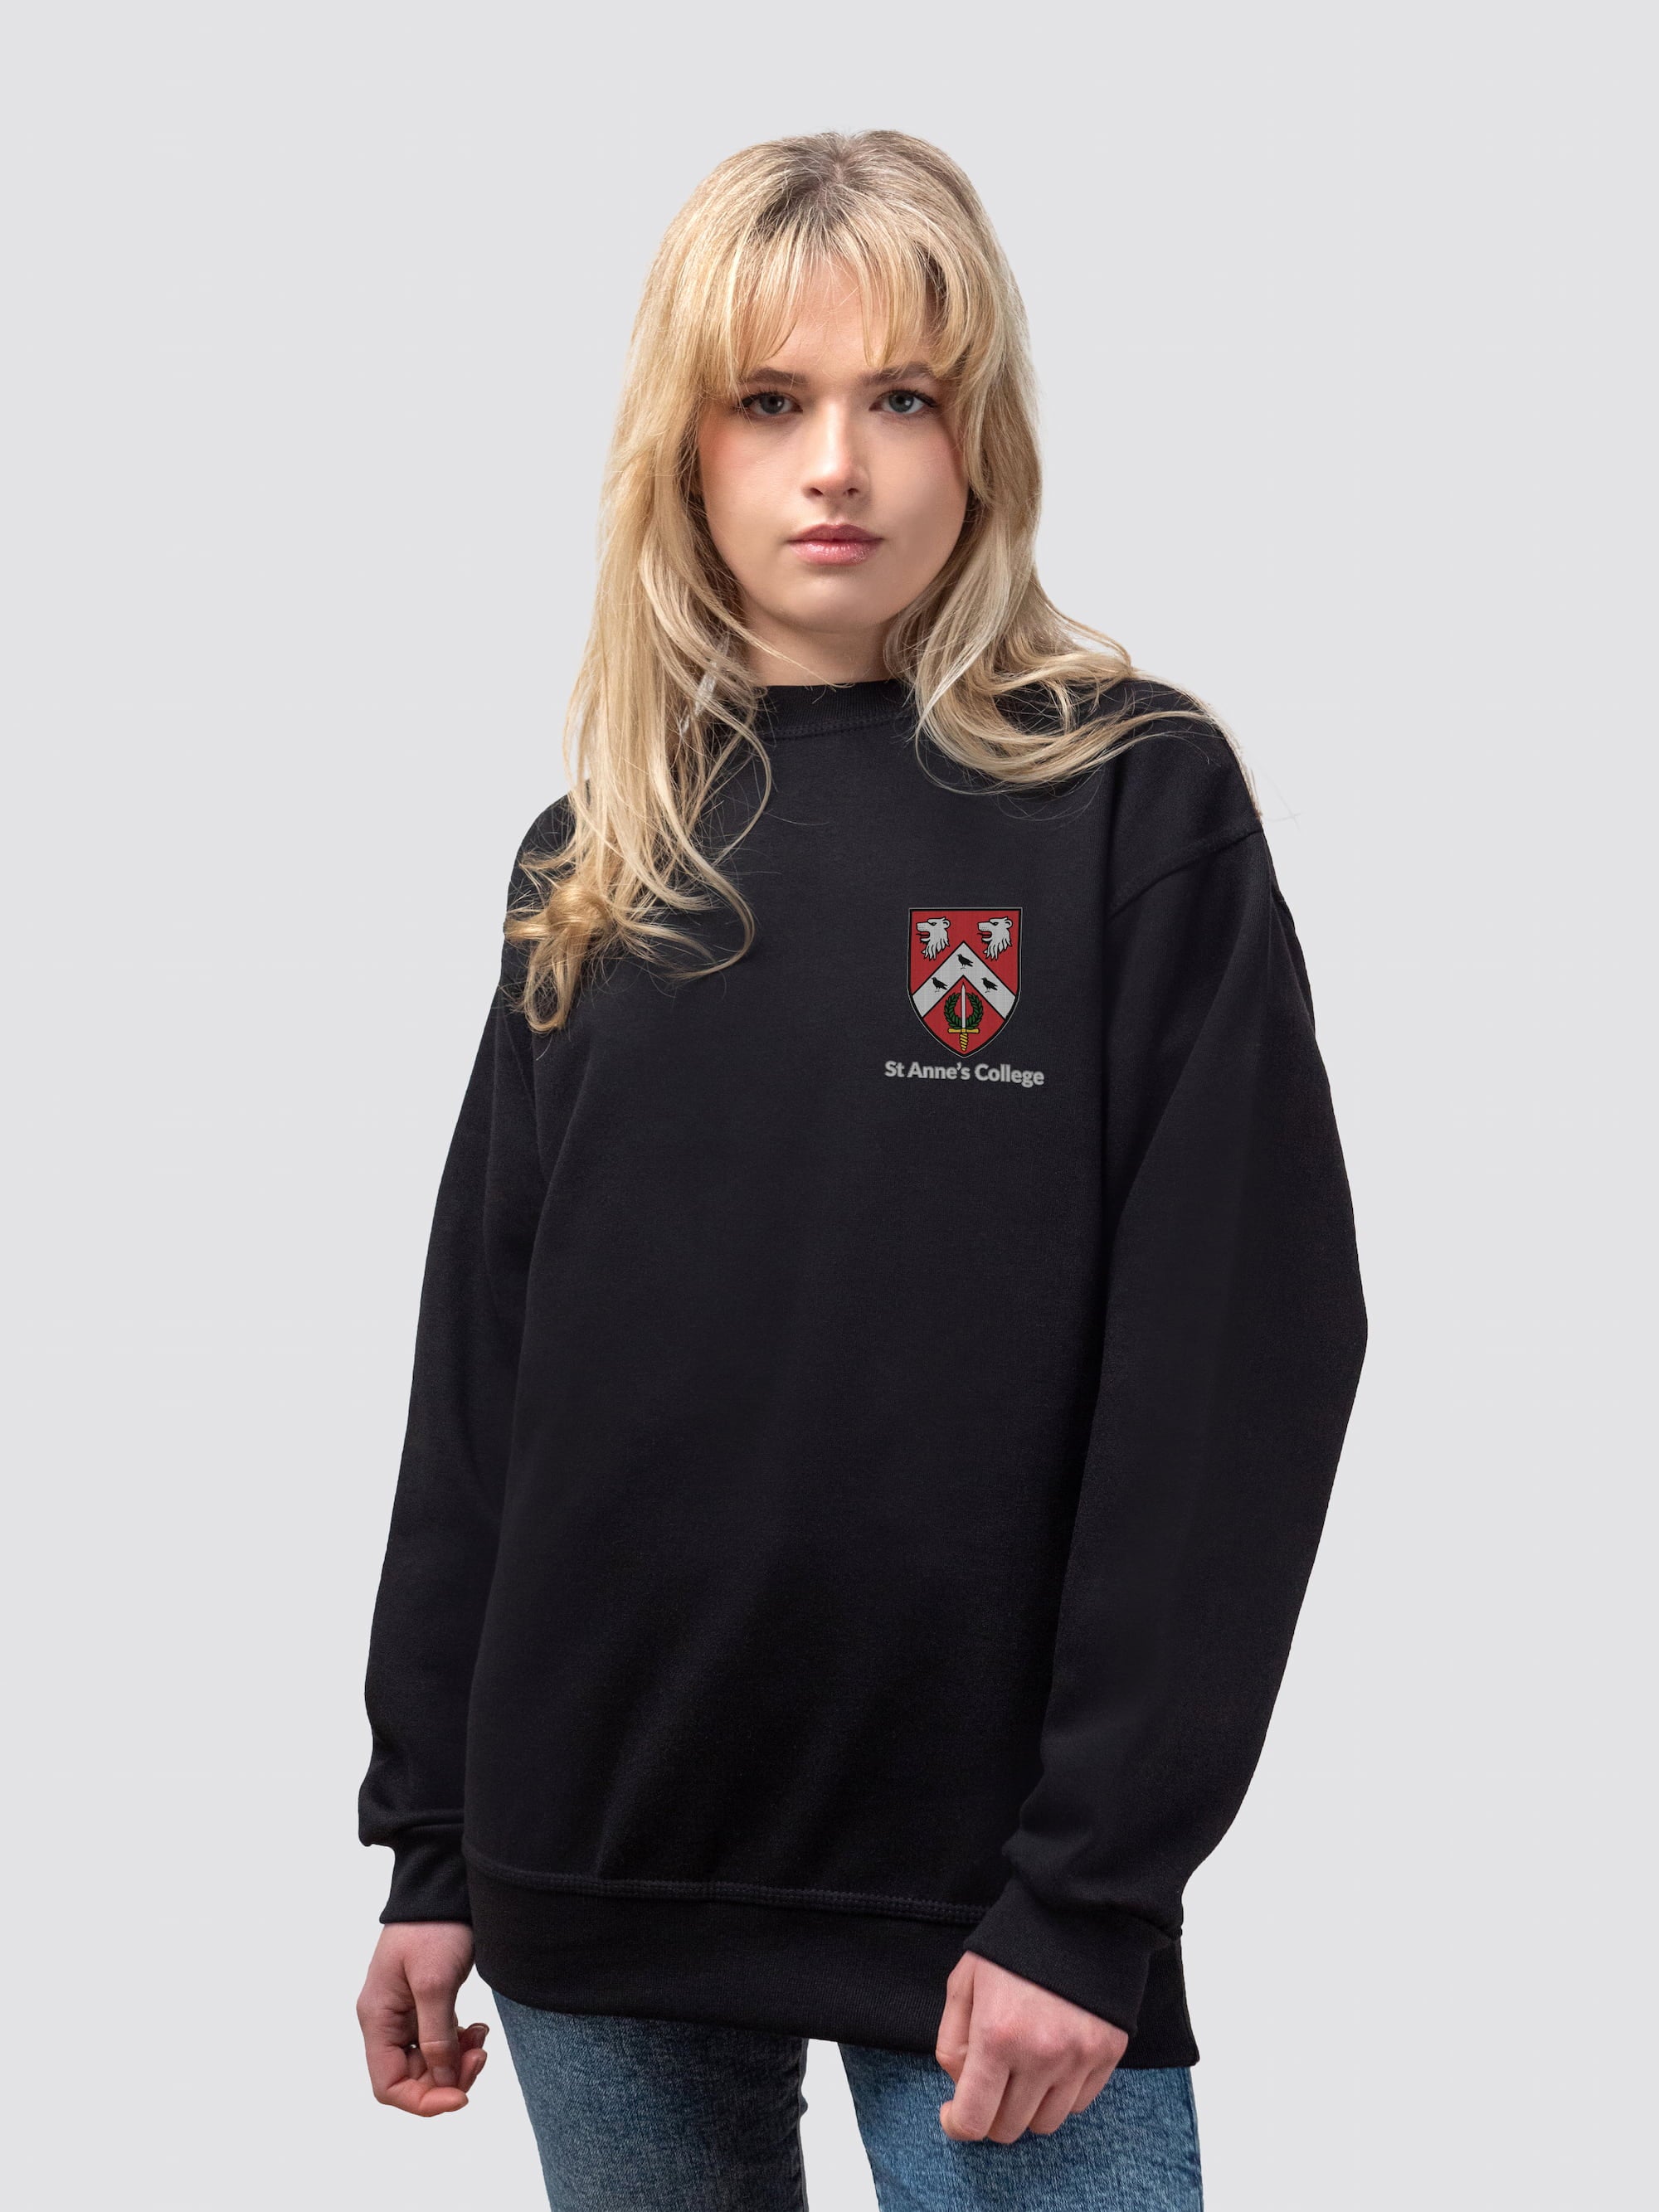 St Anne's crest on the front of a black, crew-neck sweatshirt